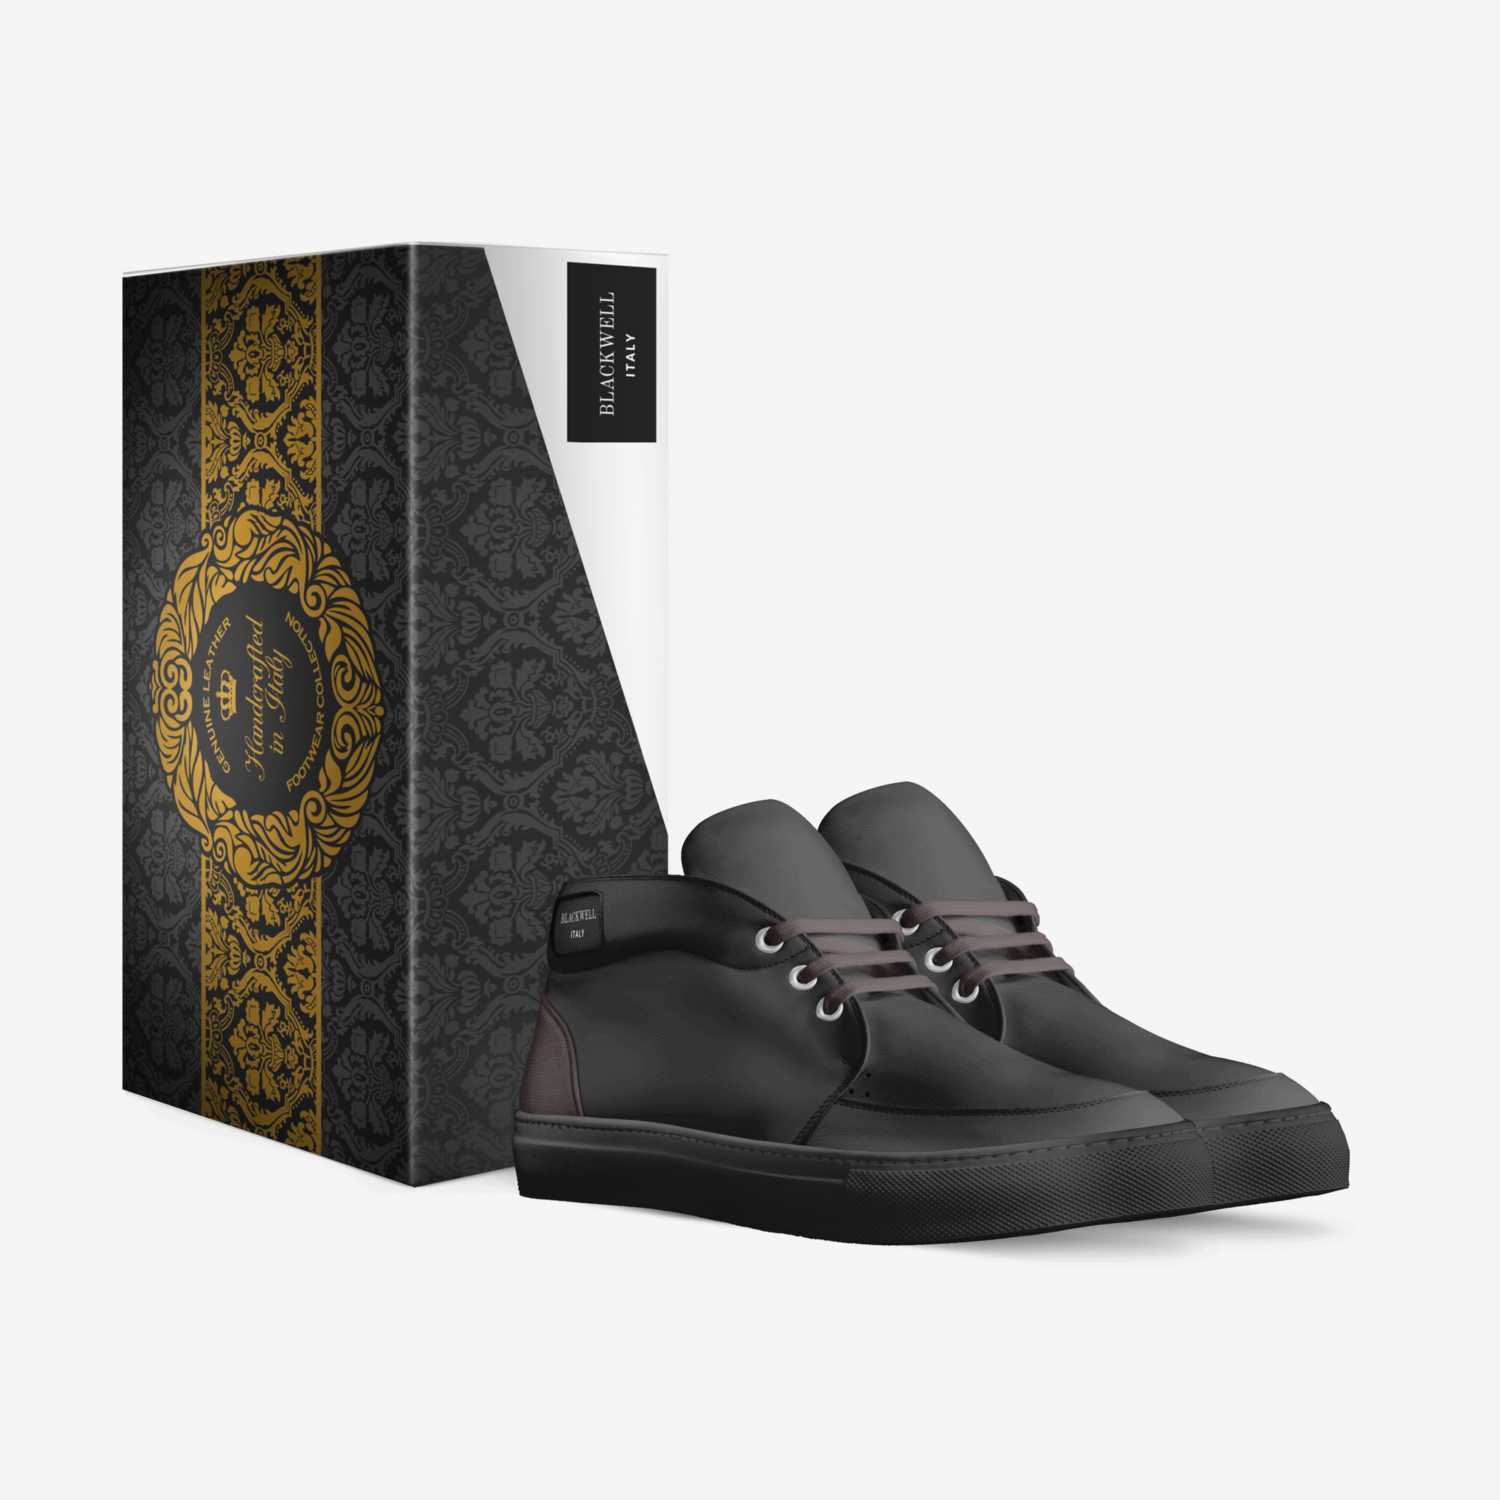 Dark Black custom made in Italy shoes by Lawrence Blackwell | Box view